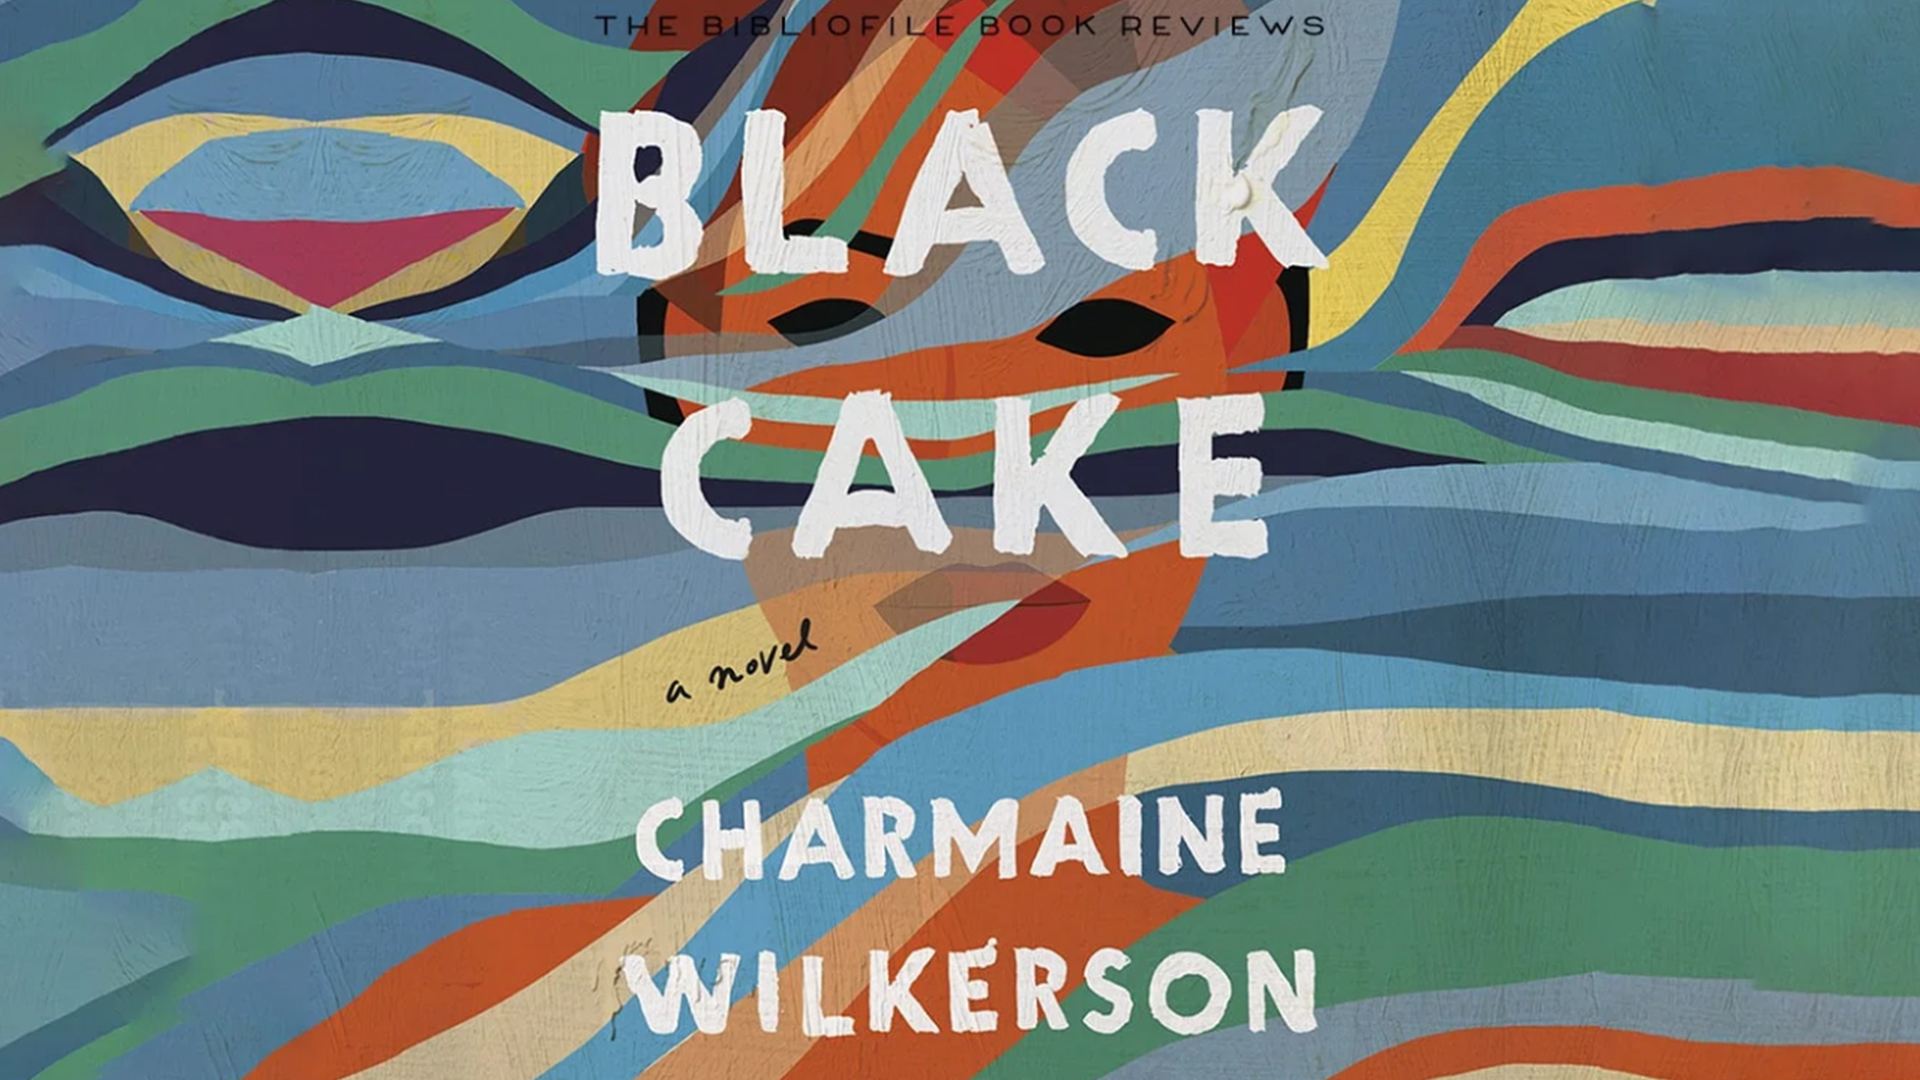 Black Cake by Charmaine Wilkerson book cover